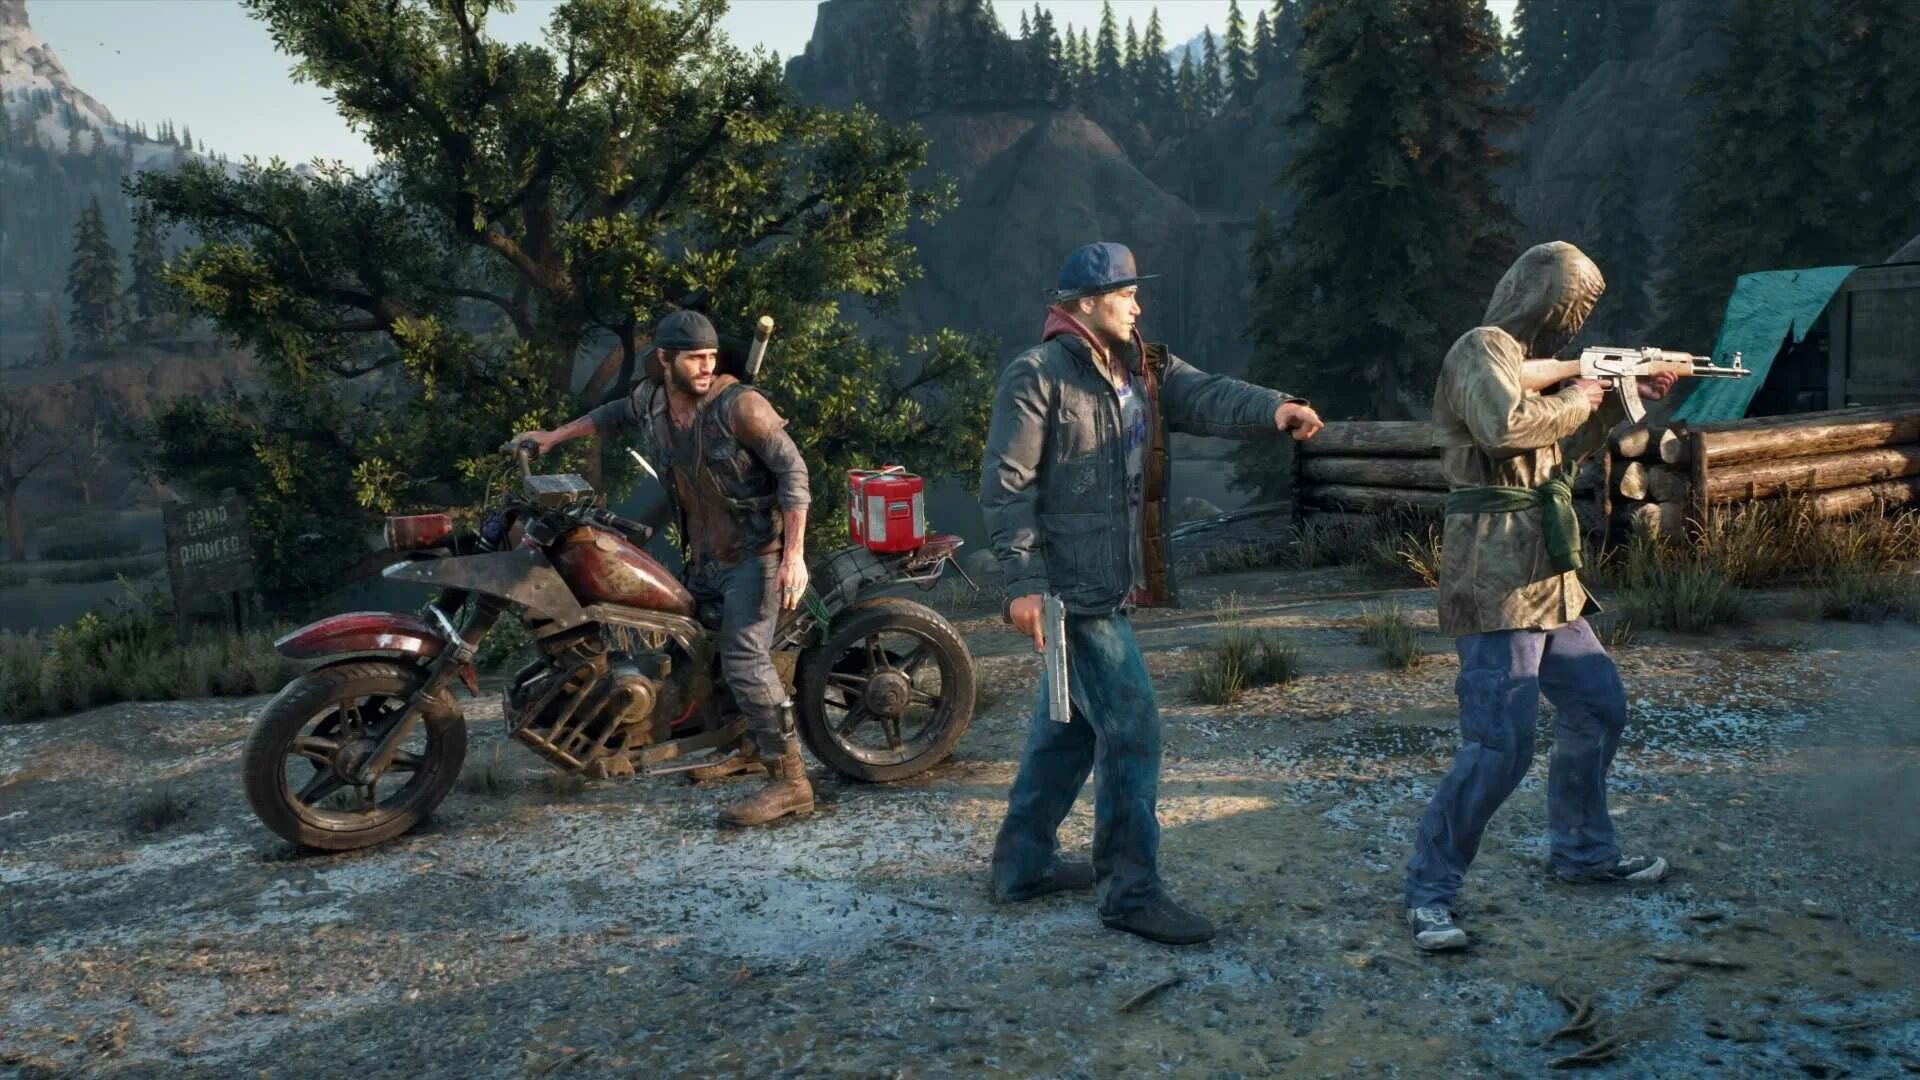 4 life игра. Days gone. Days gone ps4. Игра Days gone ps4. Days gone мародеры.